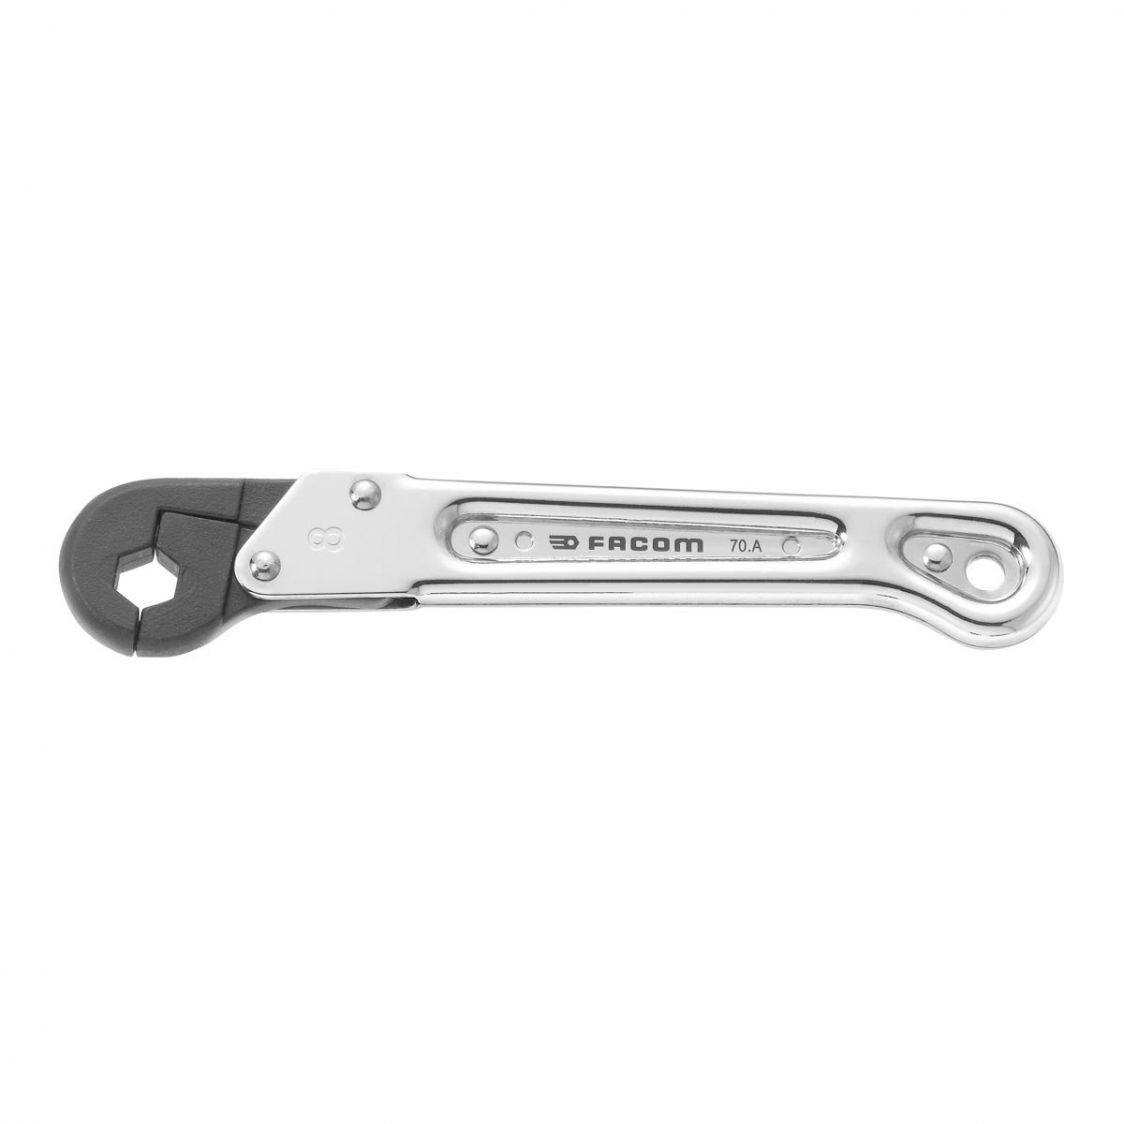 FACOM 70A.32 - 32mm Metric Ratchet Flare Nut Spanner